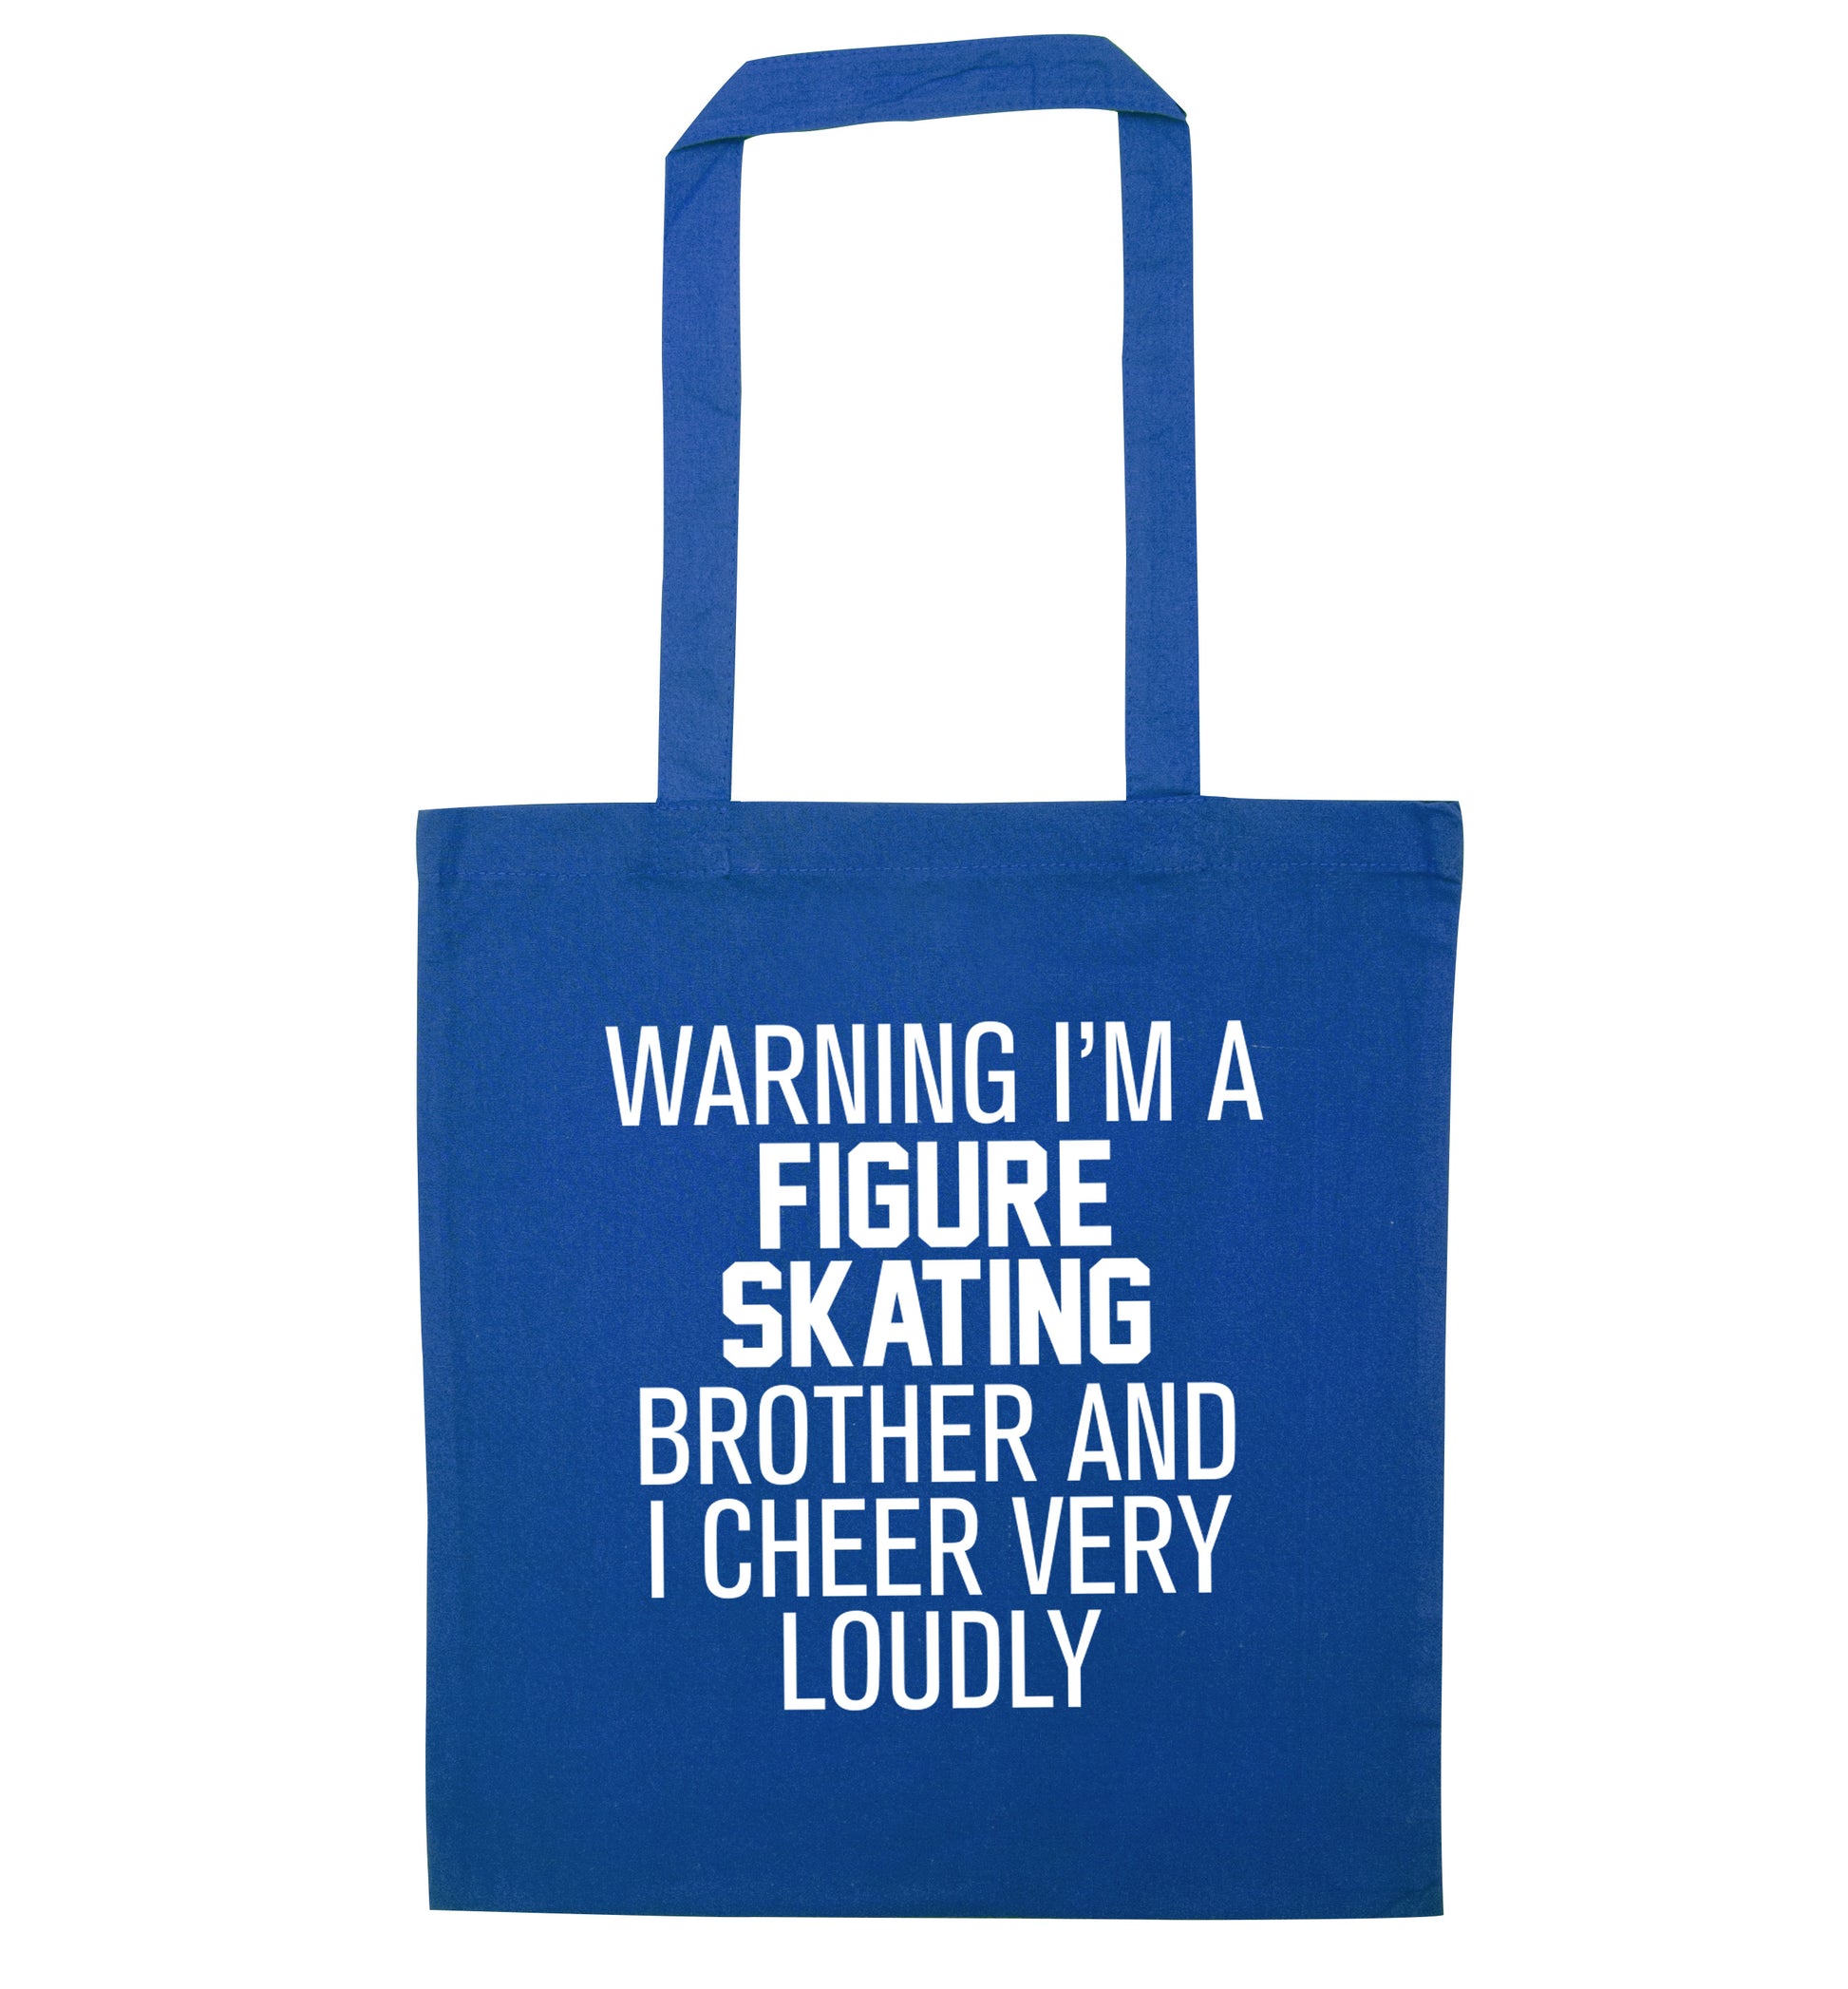 Warning I'm a figure skating brother and I cheer very loudly blue tote bag